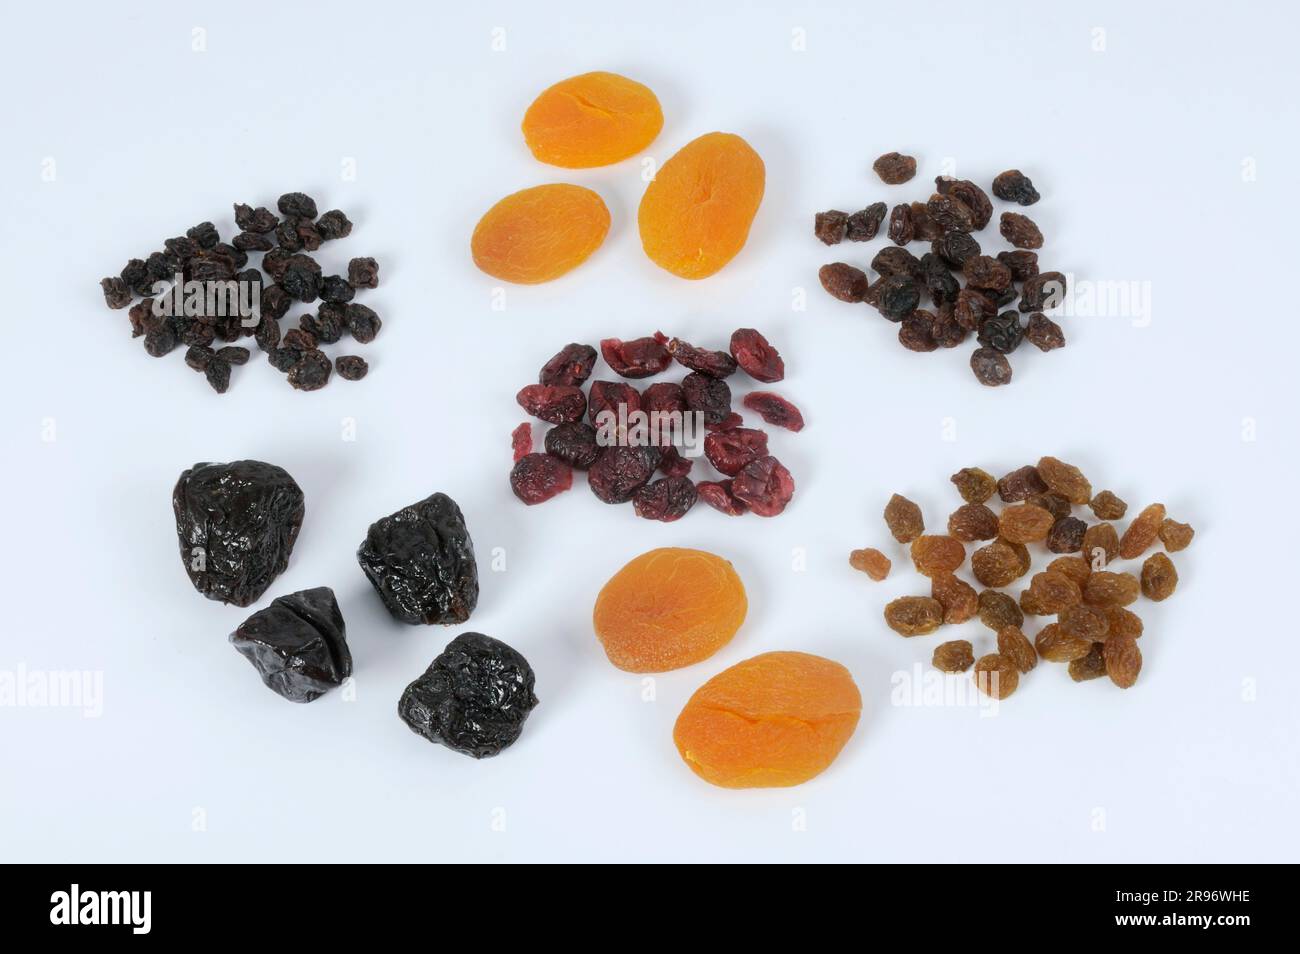 Dried fruit, apricots, currants, sultanas, plums, dried fruit, dried Stock Photo